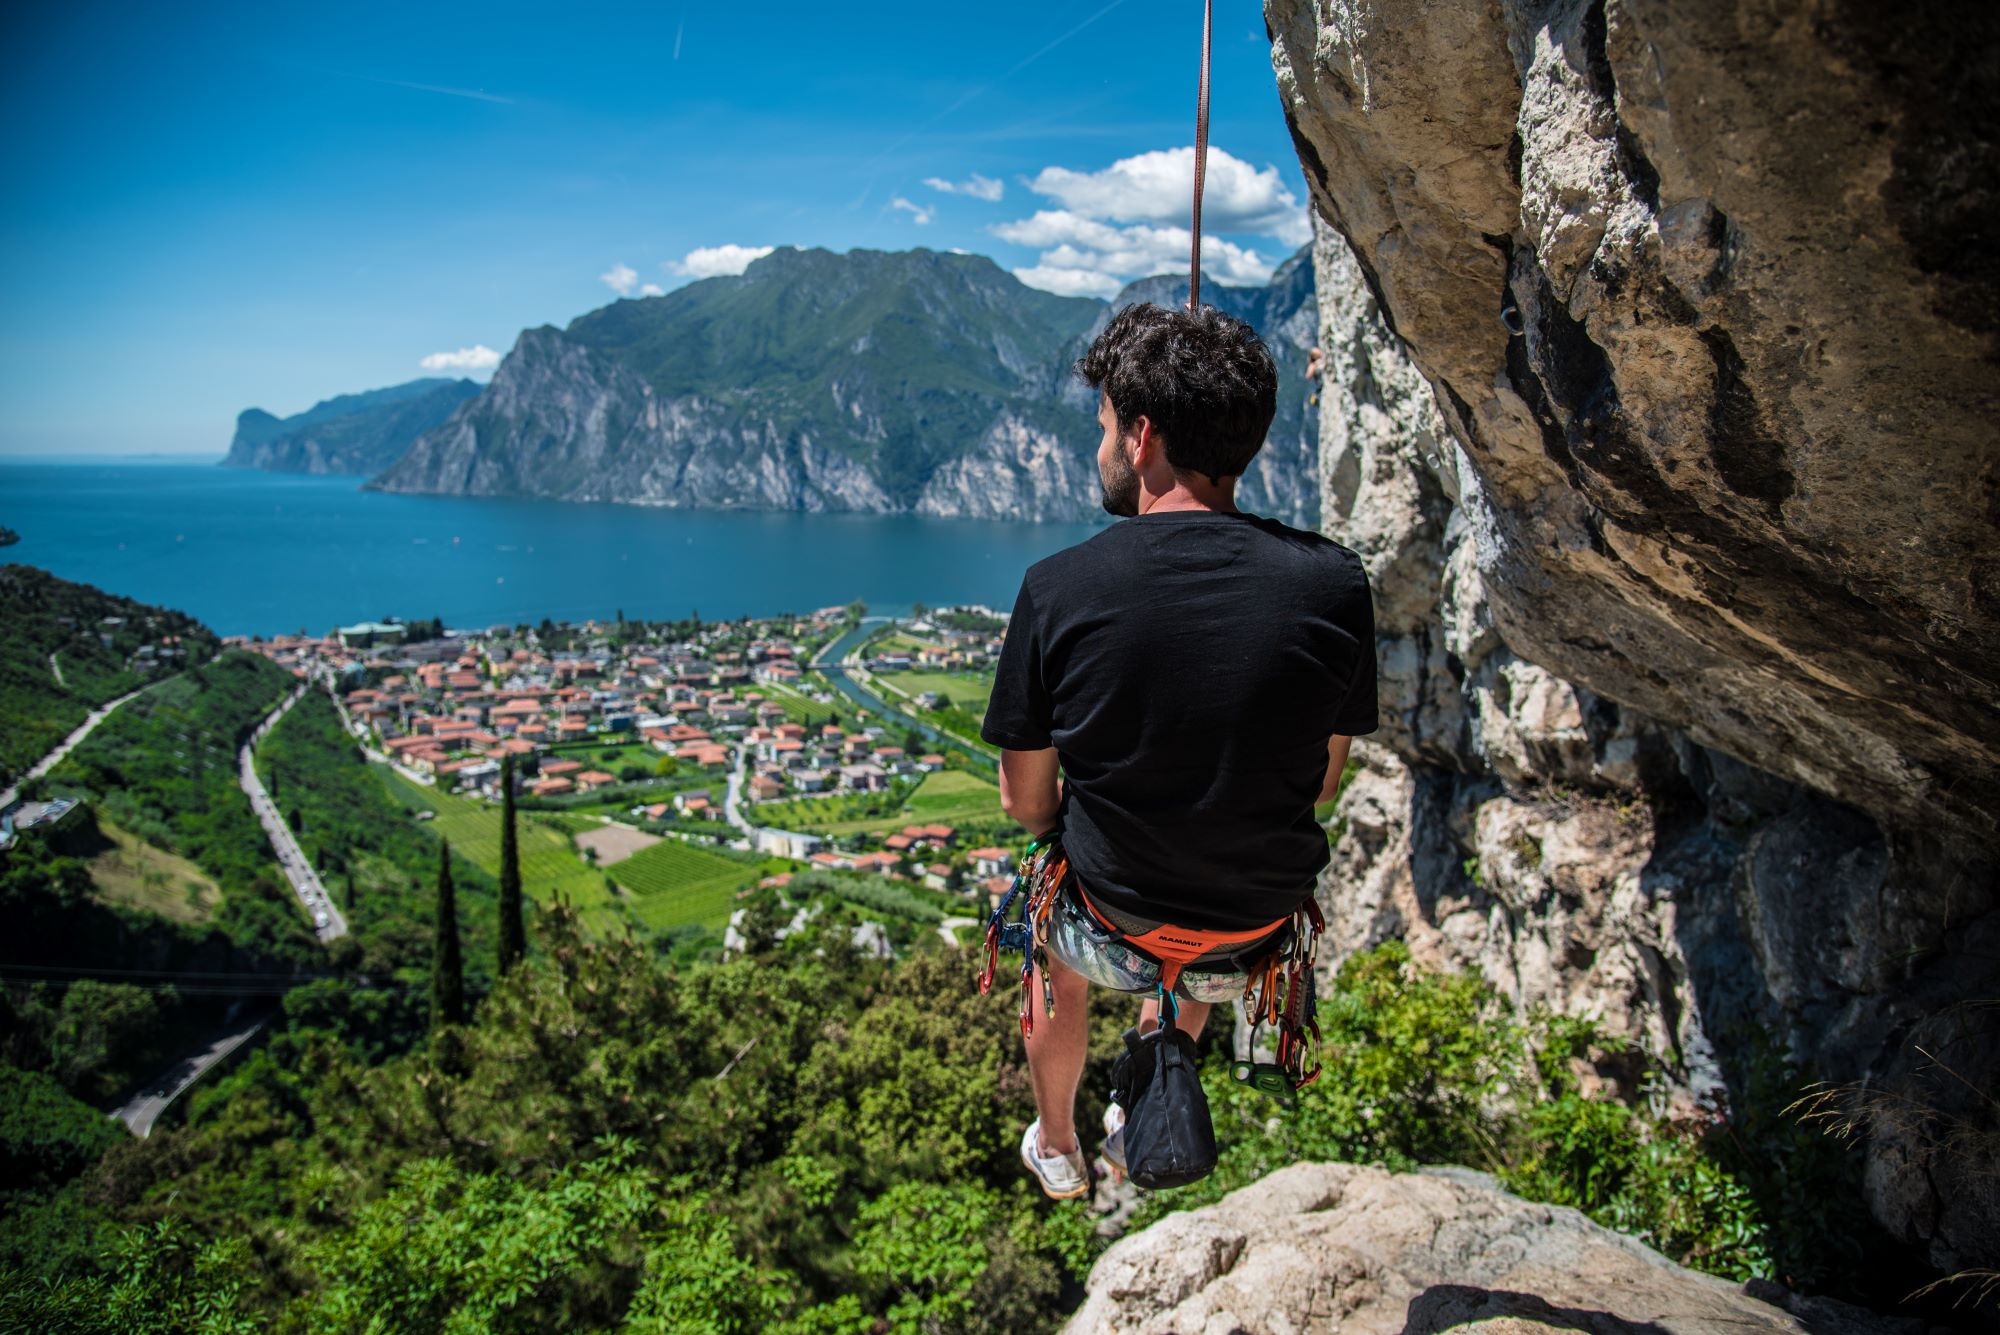 Climber at the summit with a view of Lake Garda